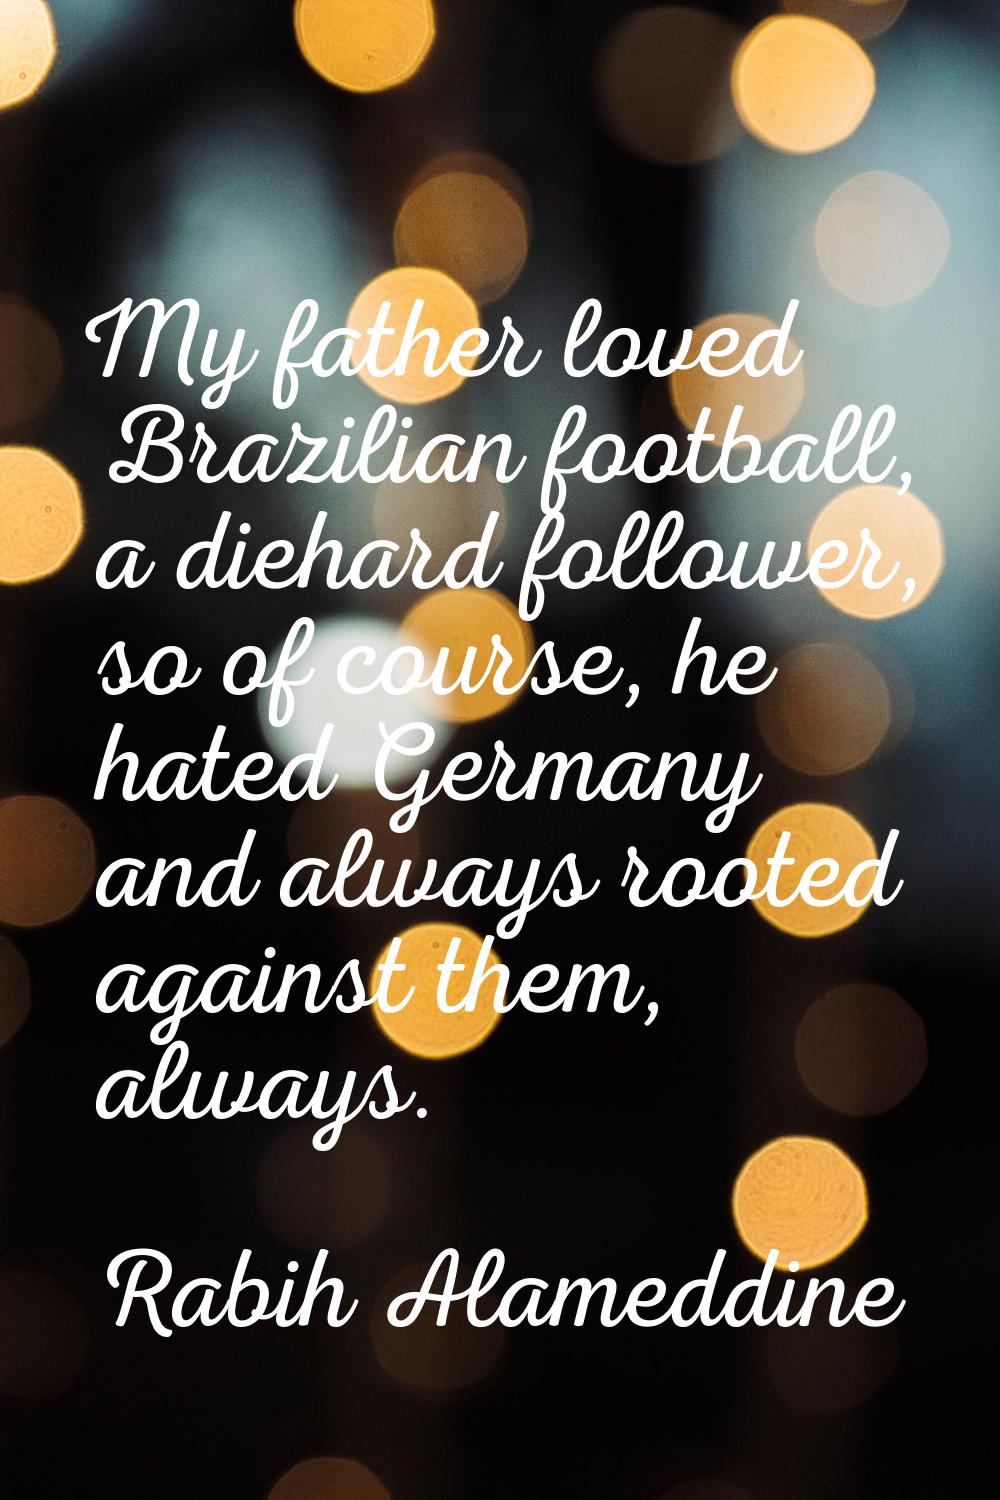 My father loved Brazilian football, a diehard follower, so of course, he hated Germany and always r